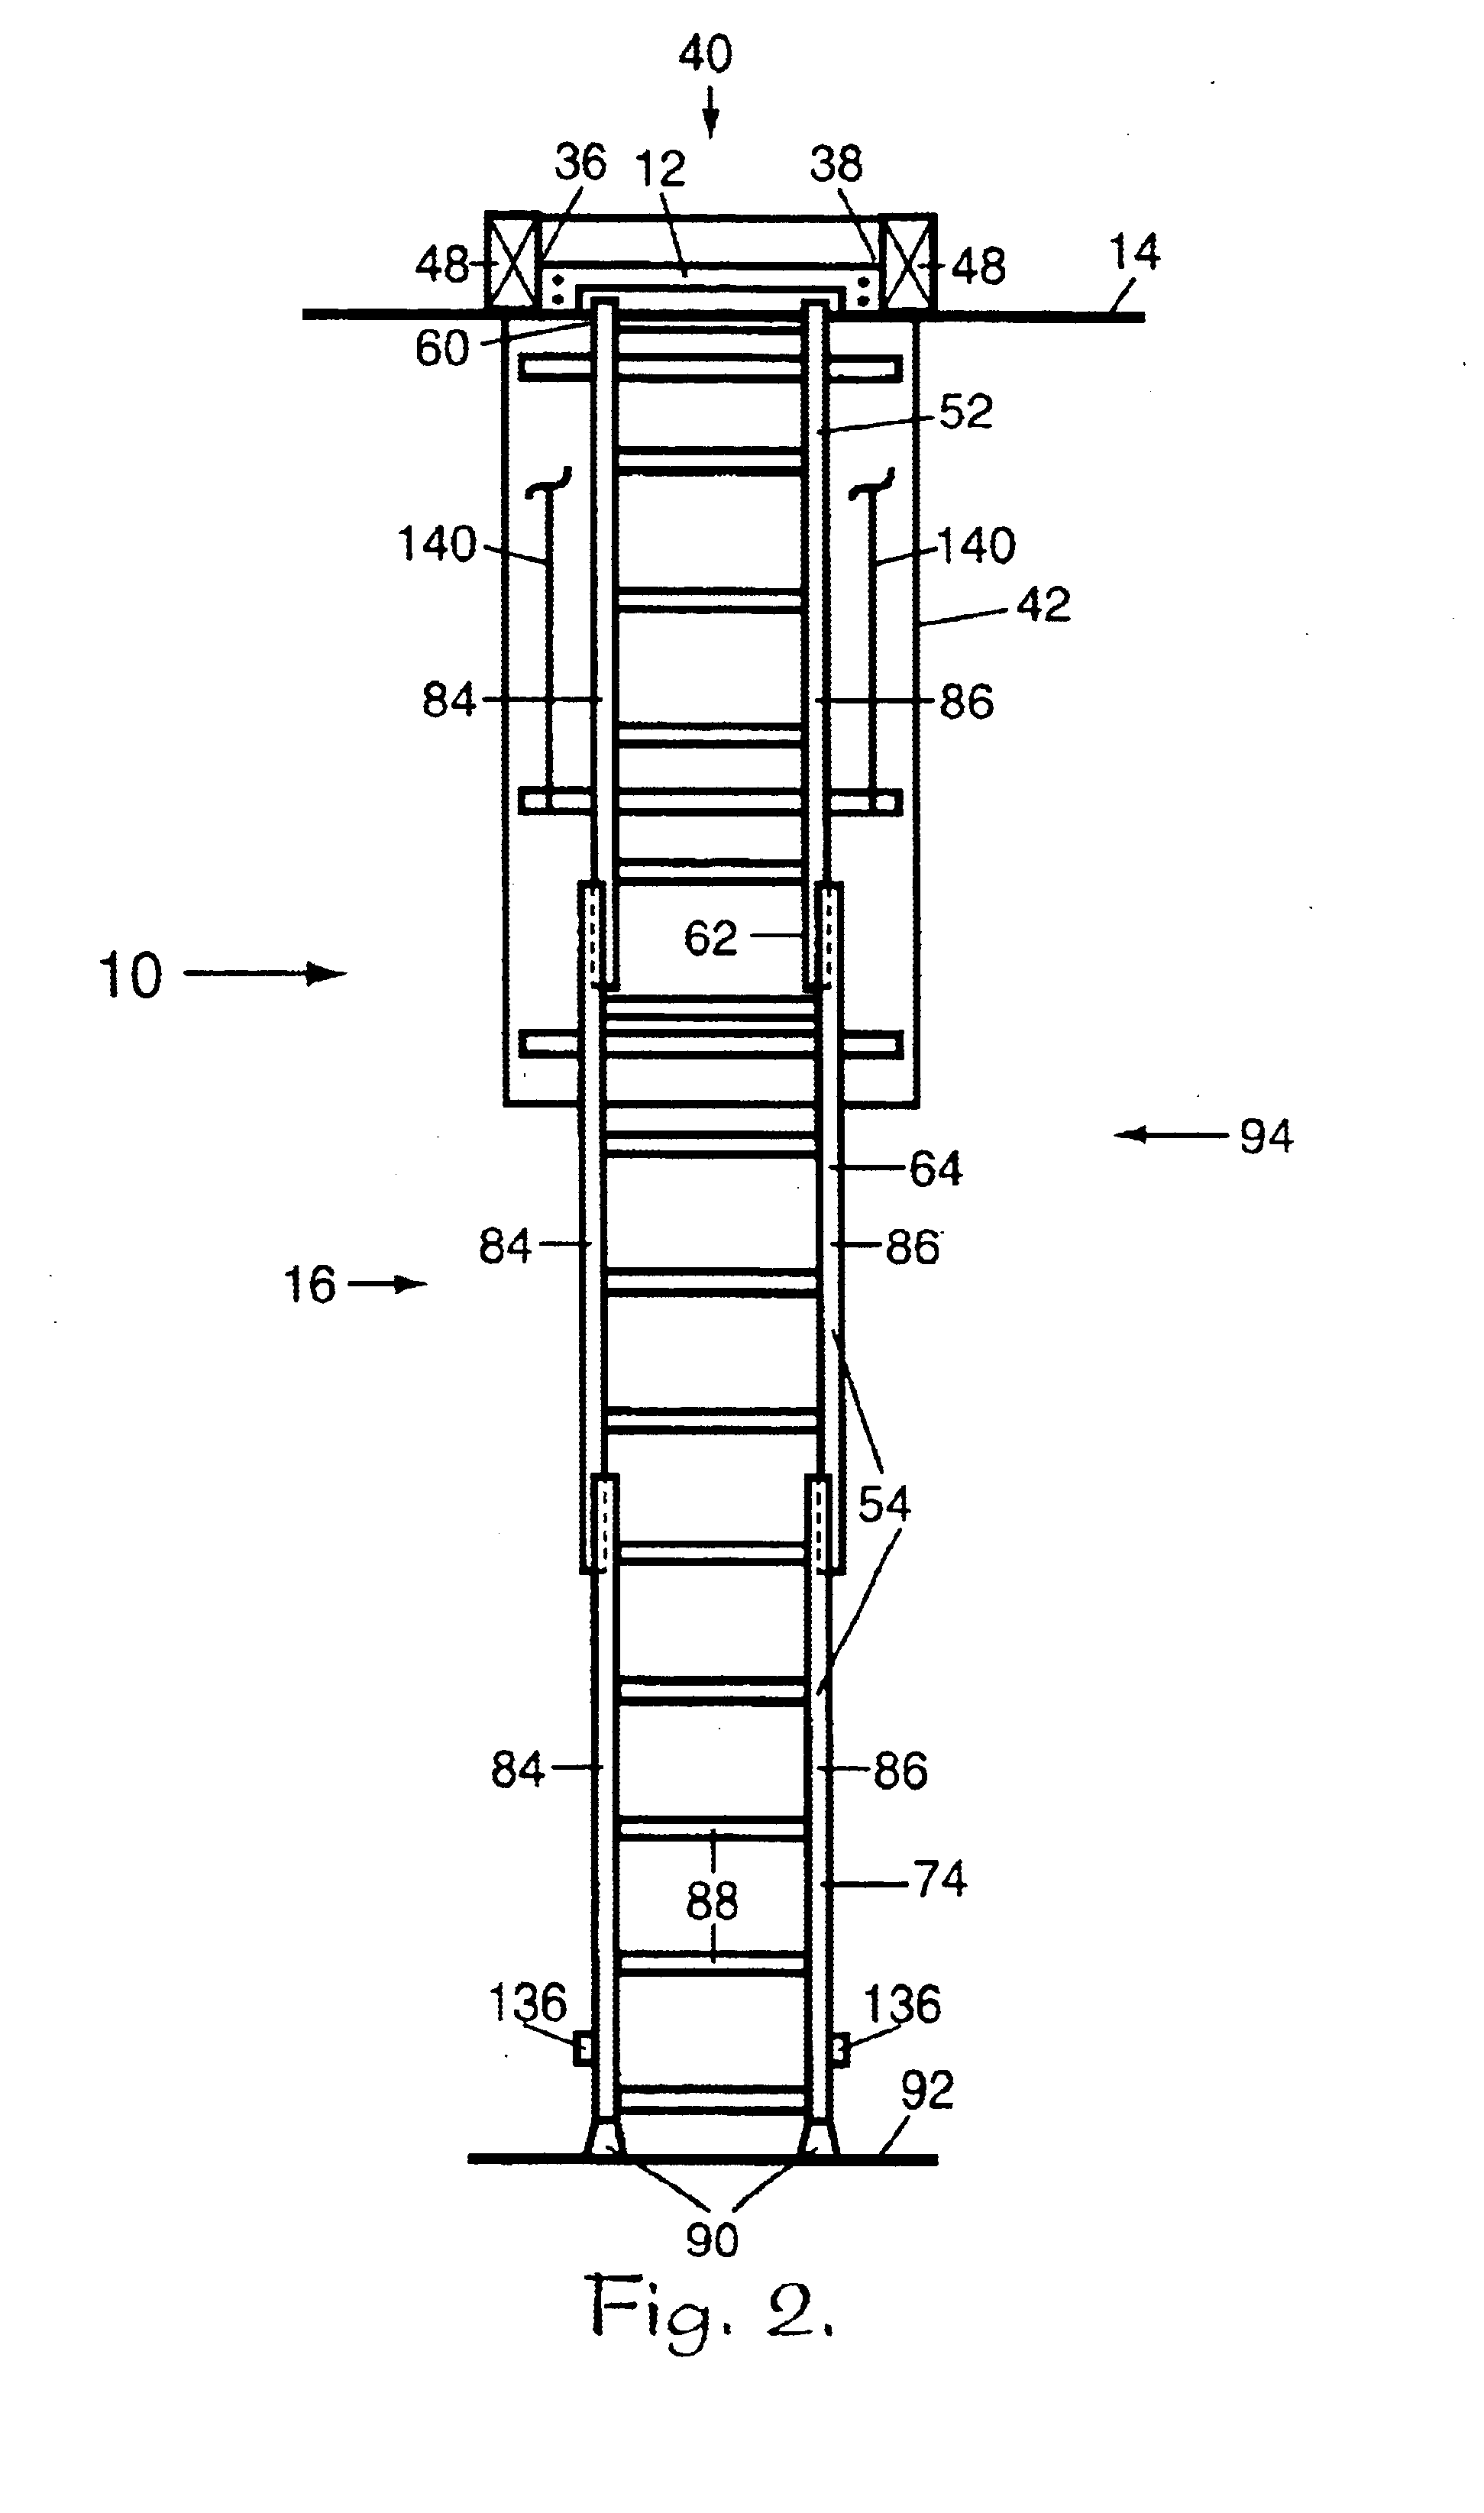 Motorized access apparatus for elevated areas